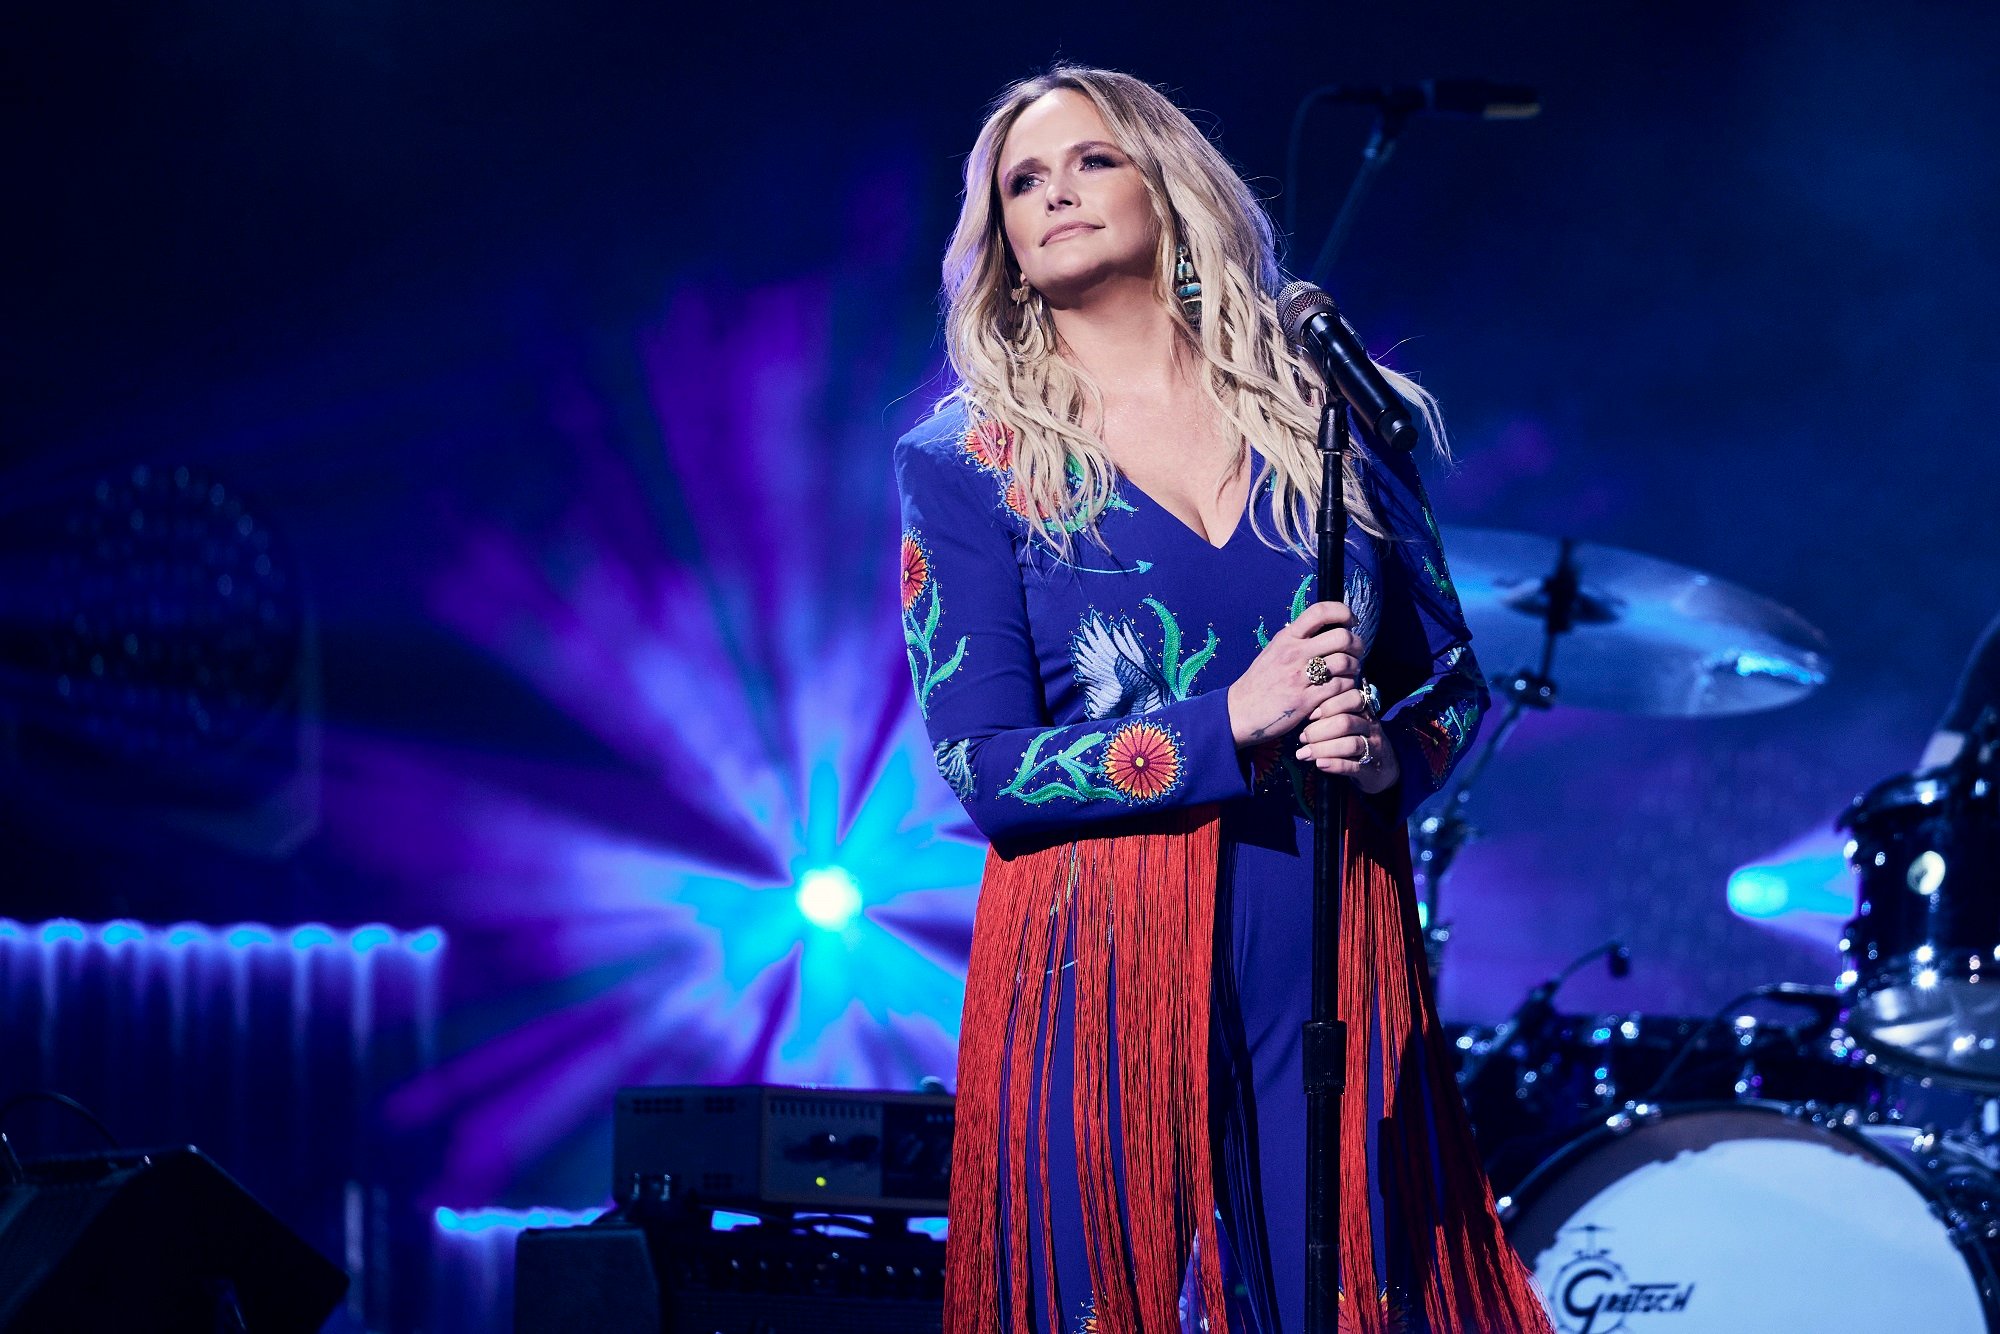 Miranda Lambert Was Going to Walk Away From Her 1st Big Record Deal if They Didn’t Let Her Do What She Wanted